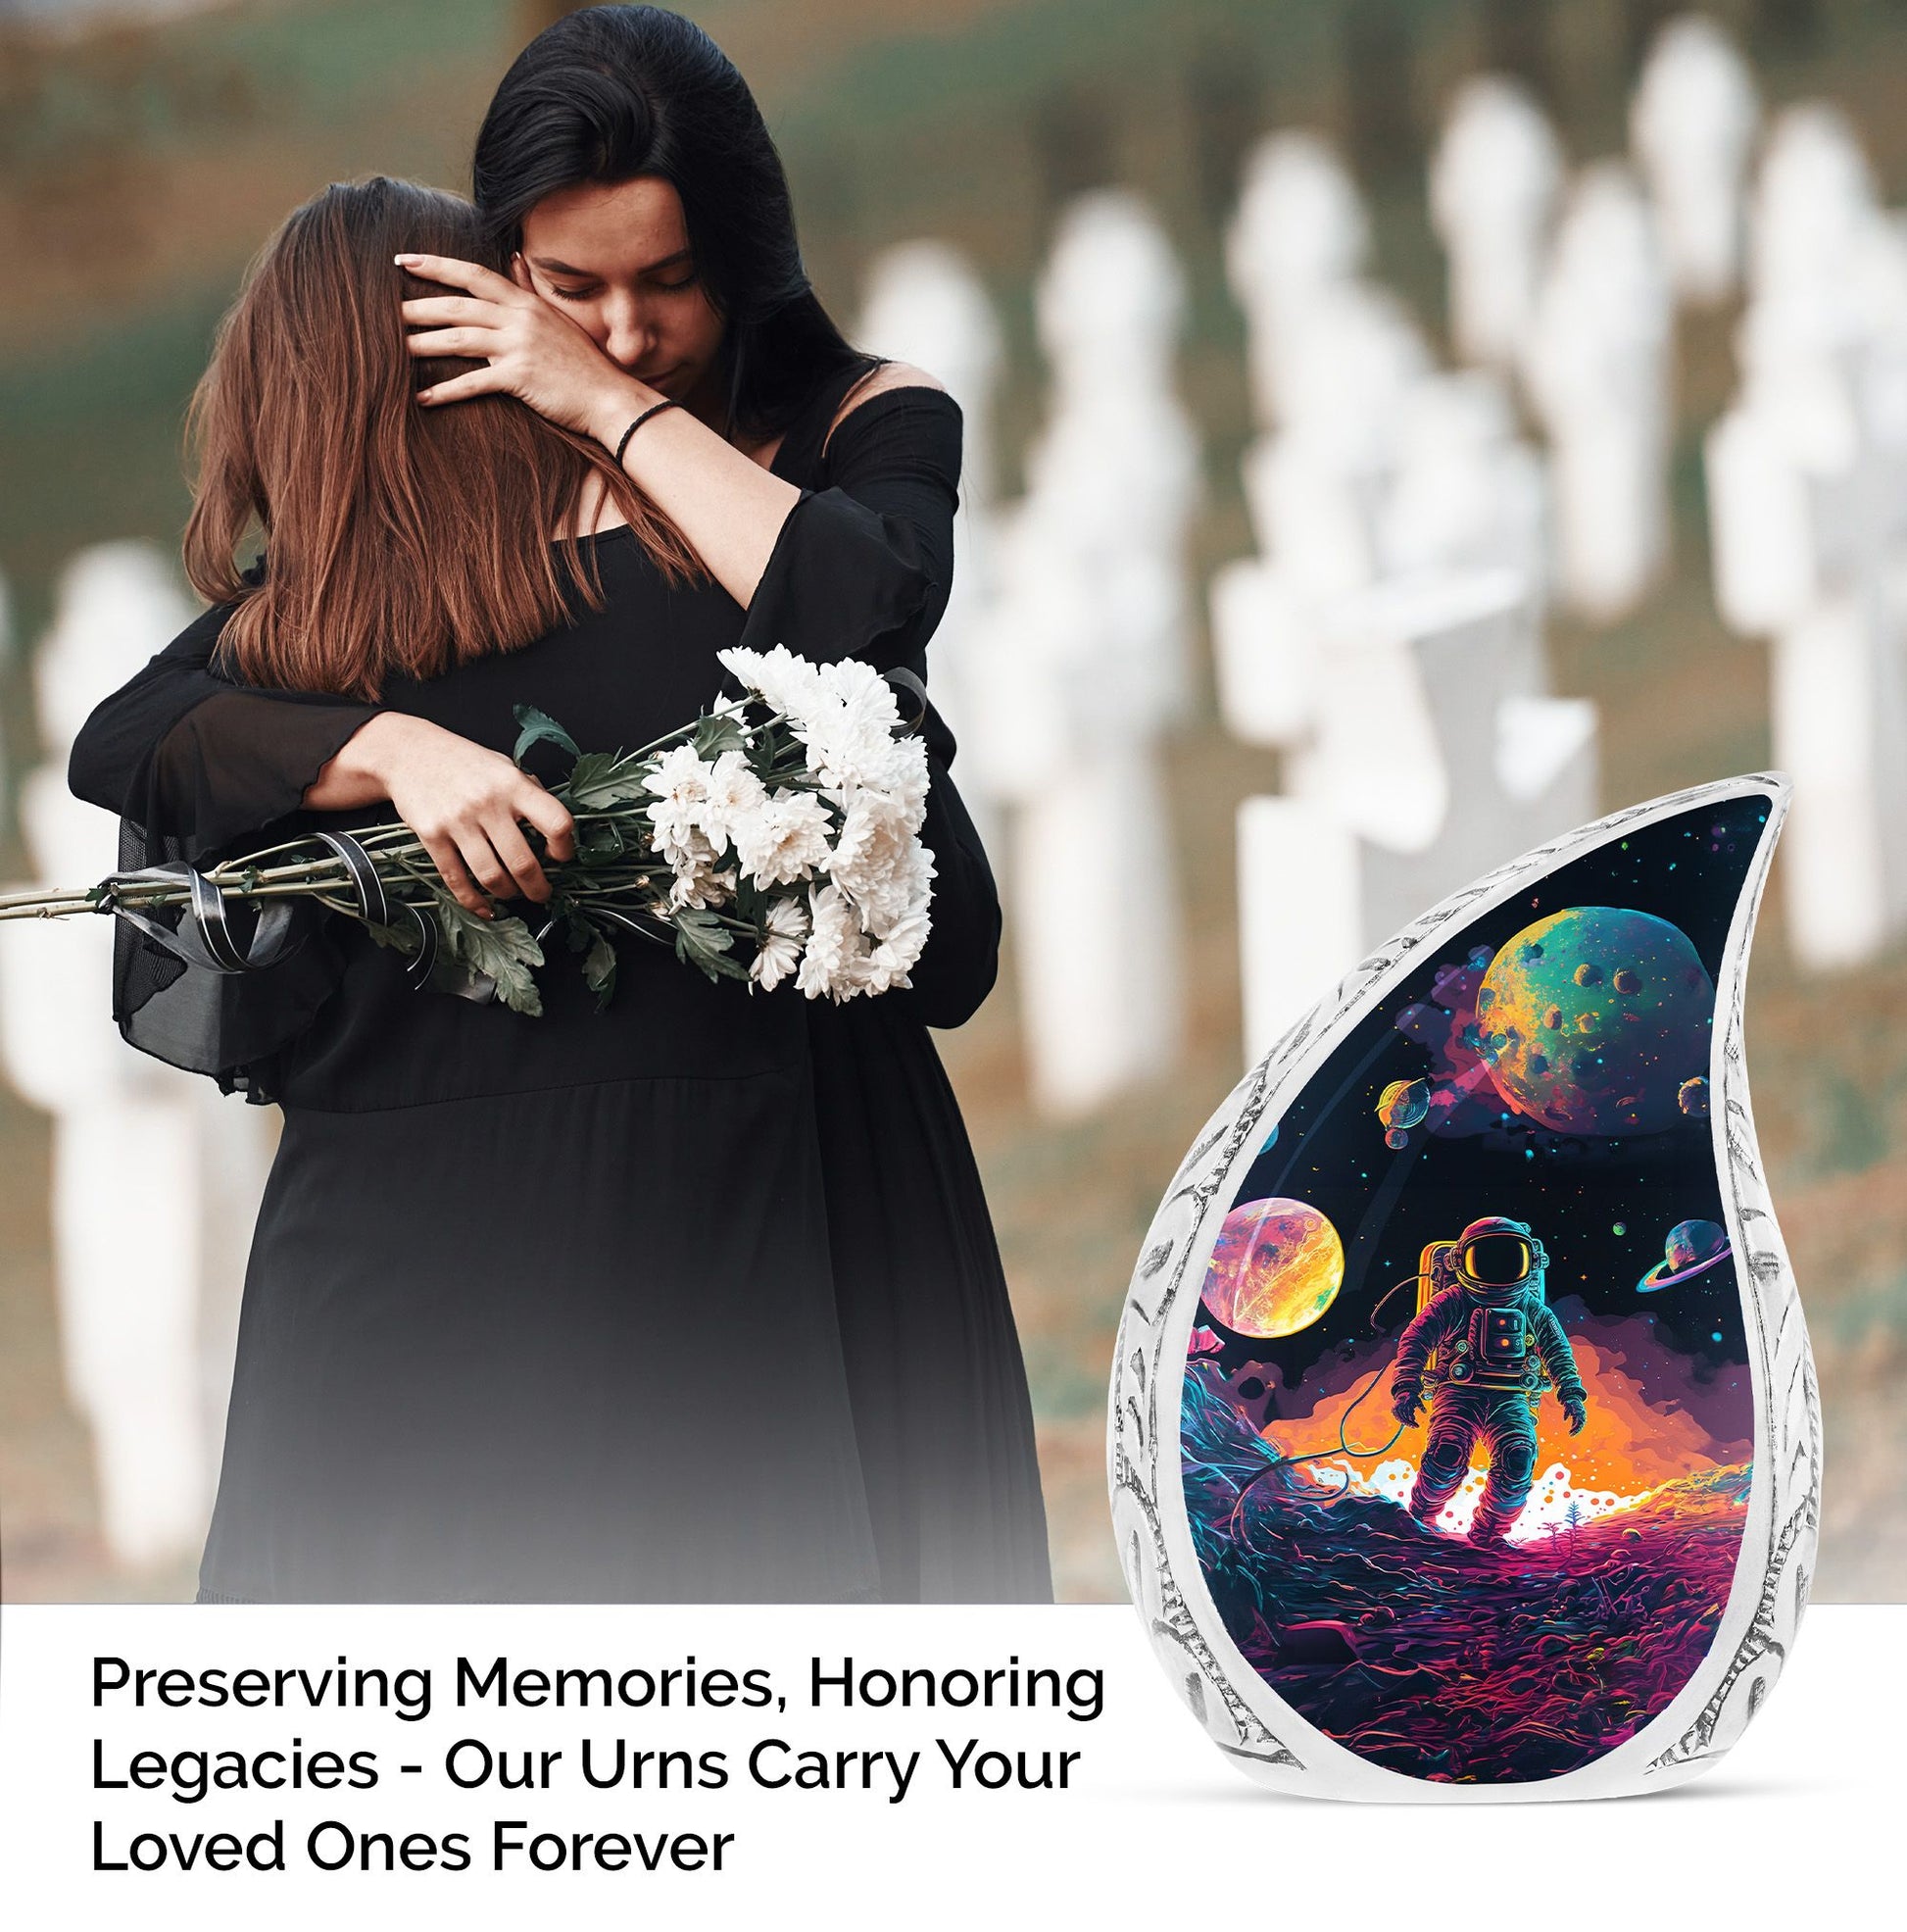 Large urn with astronaut space walk design, ideal for adult human ashes, suitable as a memorial or funeral ash holder